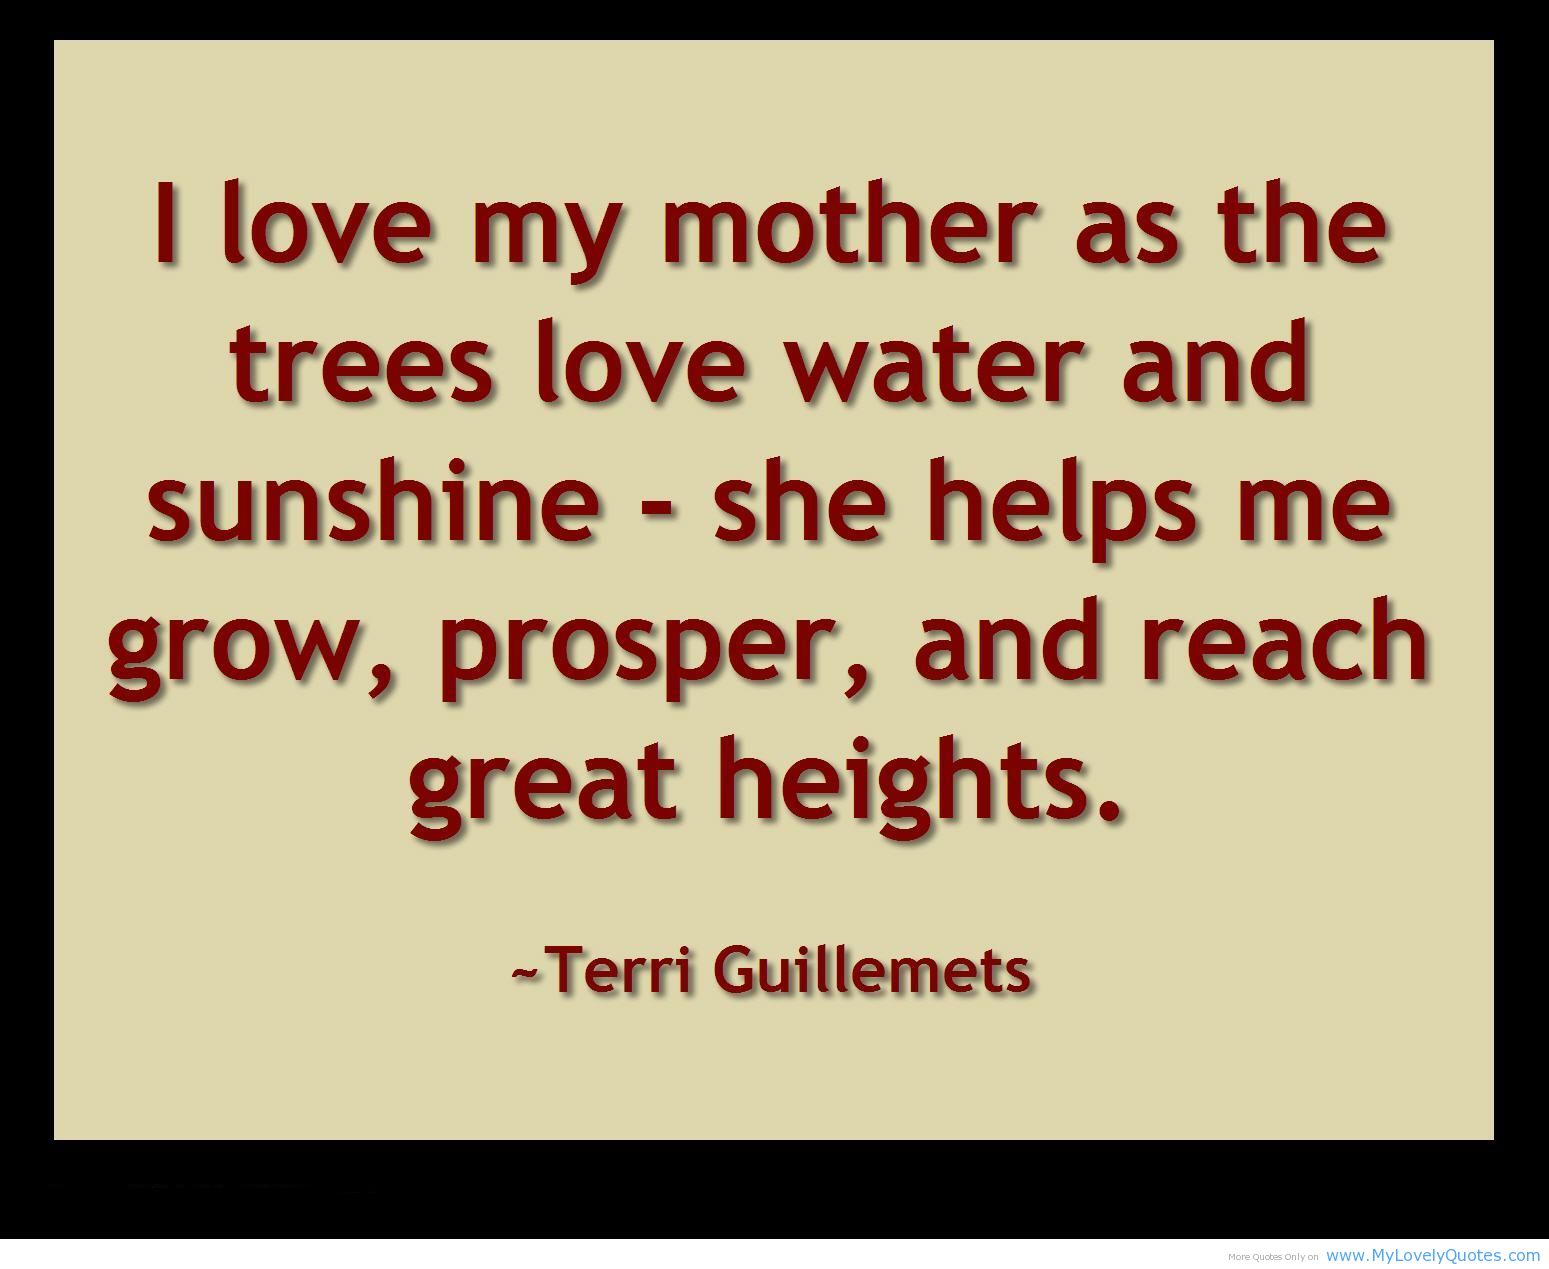 Quotes About Mothers Love. QuotesGram